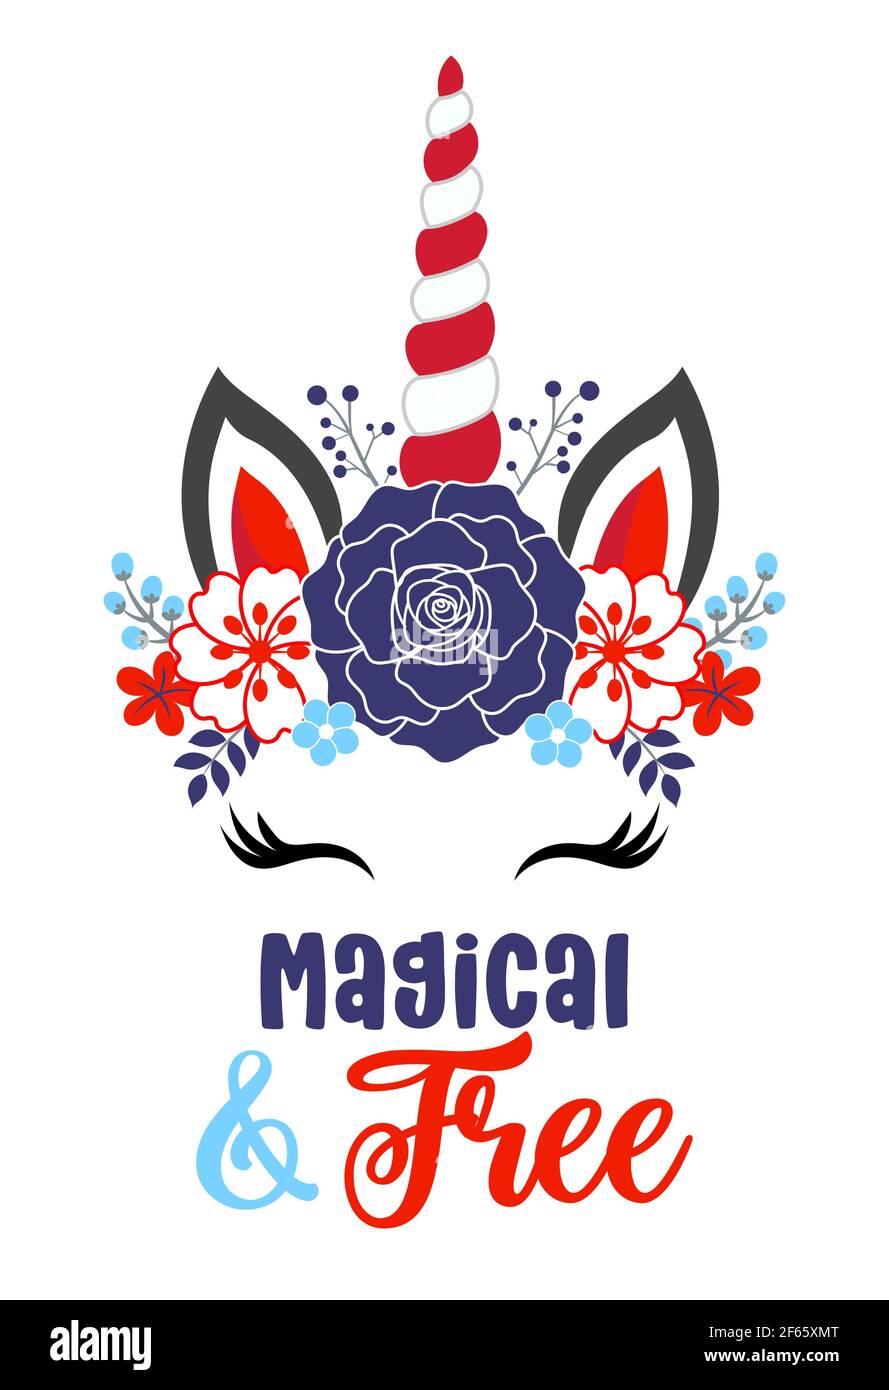 Magical and Free - Happy Independence Day July 4 lettering design illustration. Good for advertising, poster, invitation, party, greeting card, banner Stock Vector